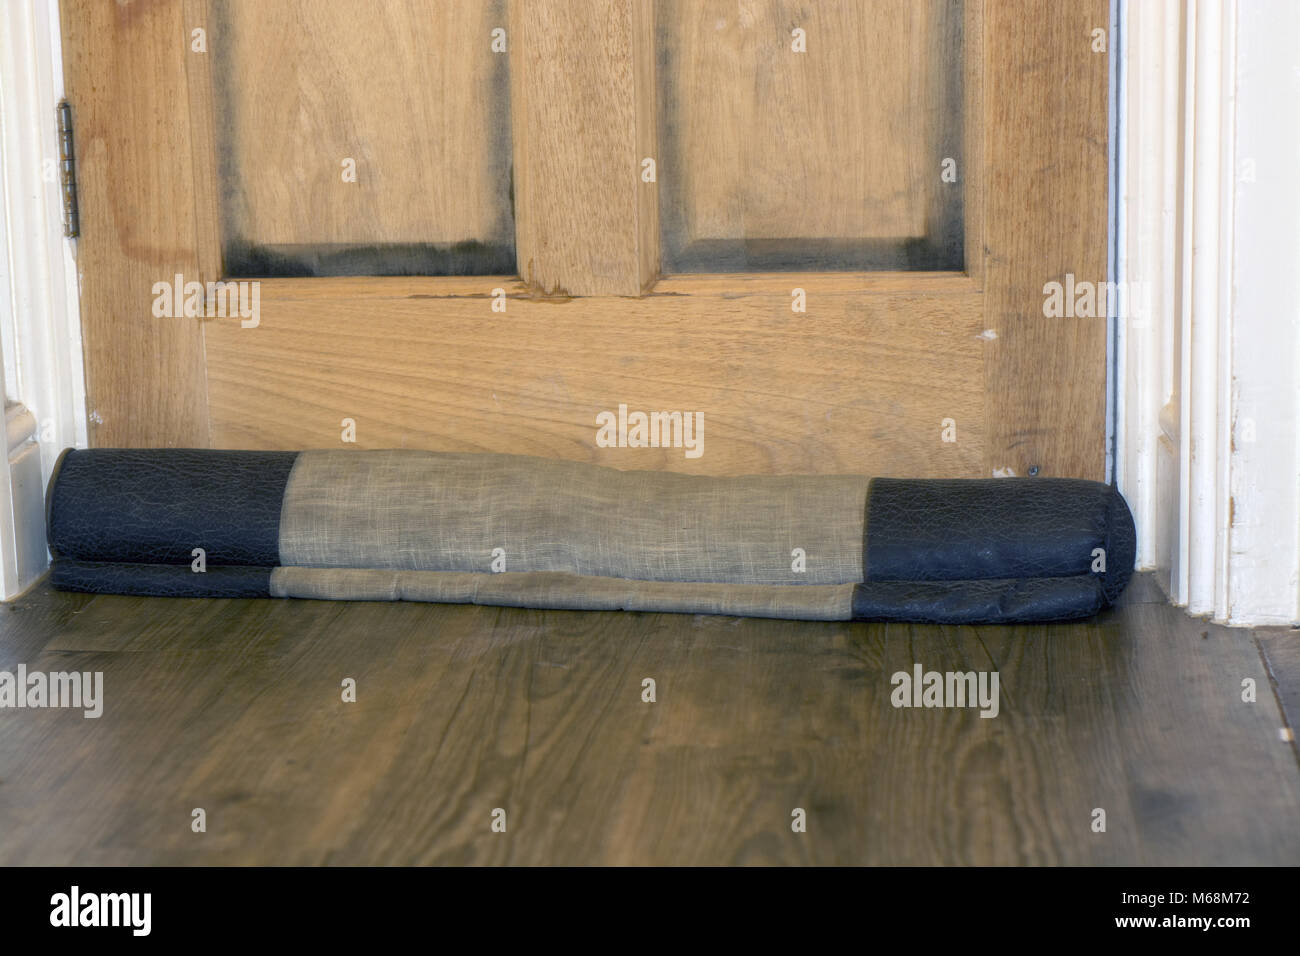 A draft excluder in situ, in front of a door Stock Photo